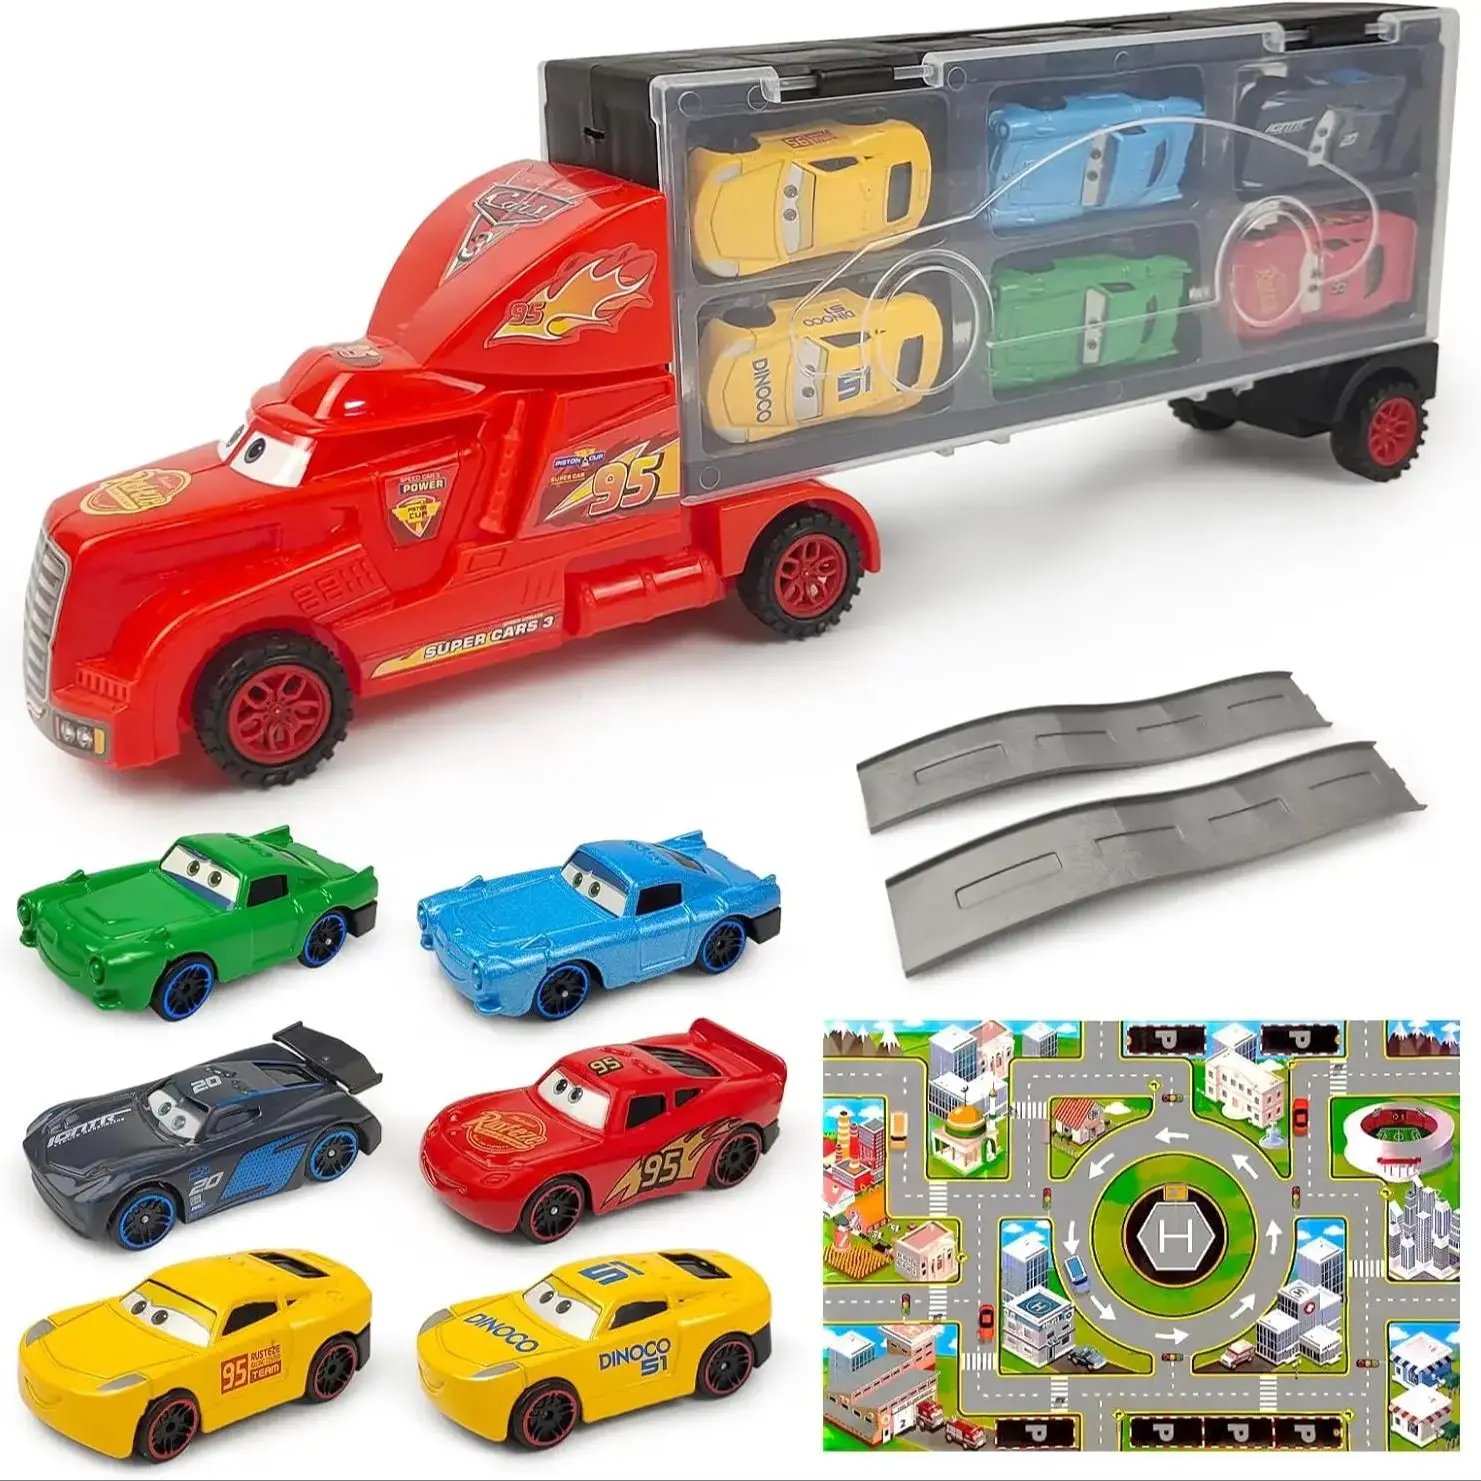 Lightning McQueen Car Toy Kids Transport Truck Toy Car with 6 Diecast Metal Cars City Map Skateboard Suitcase Toy Set Boys Gift